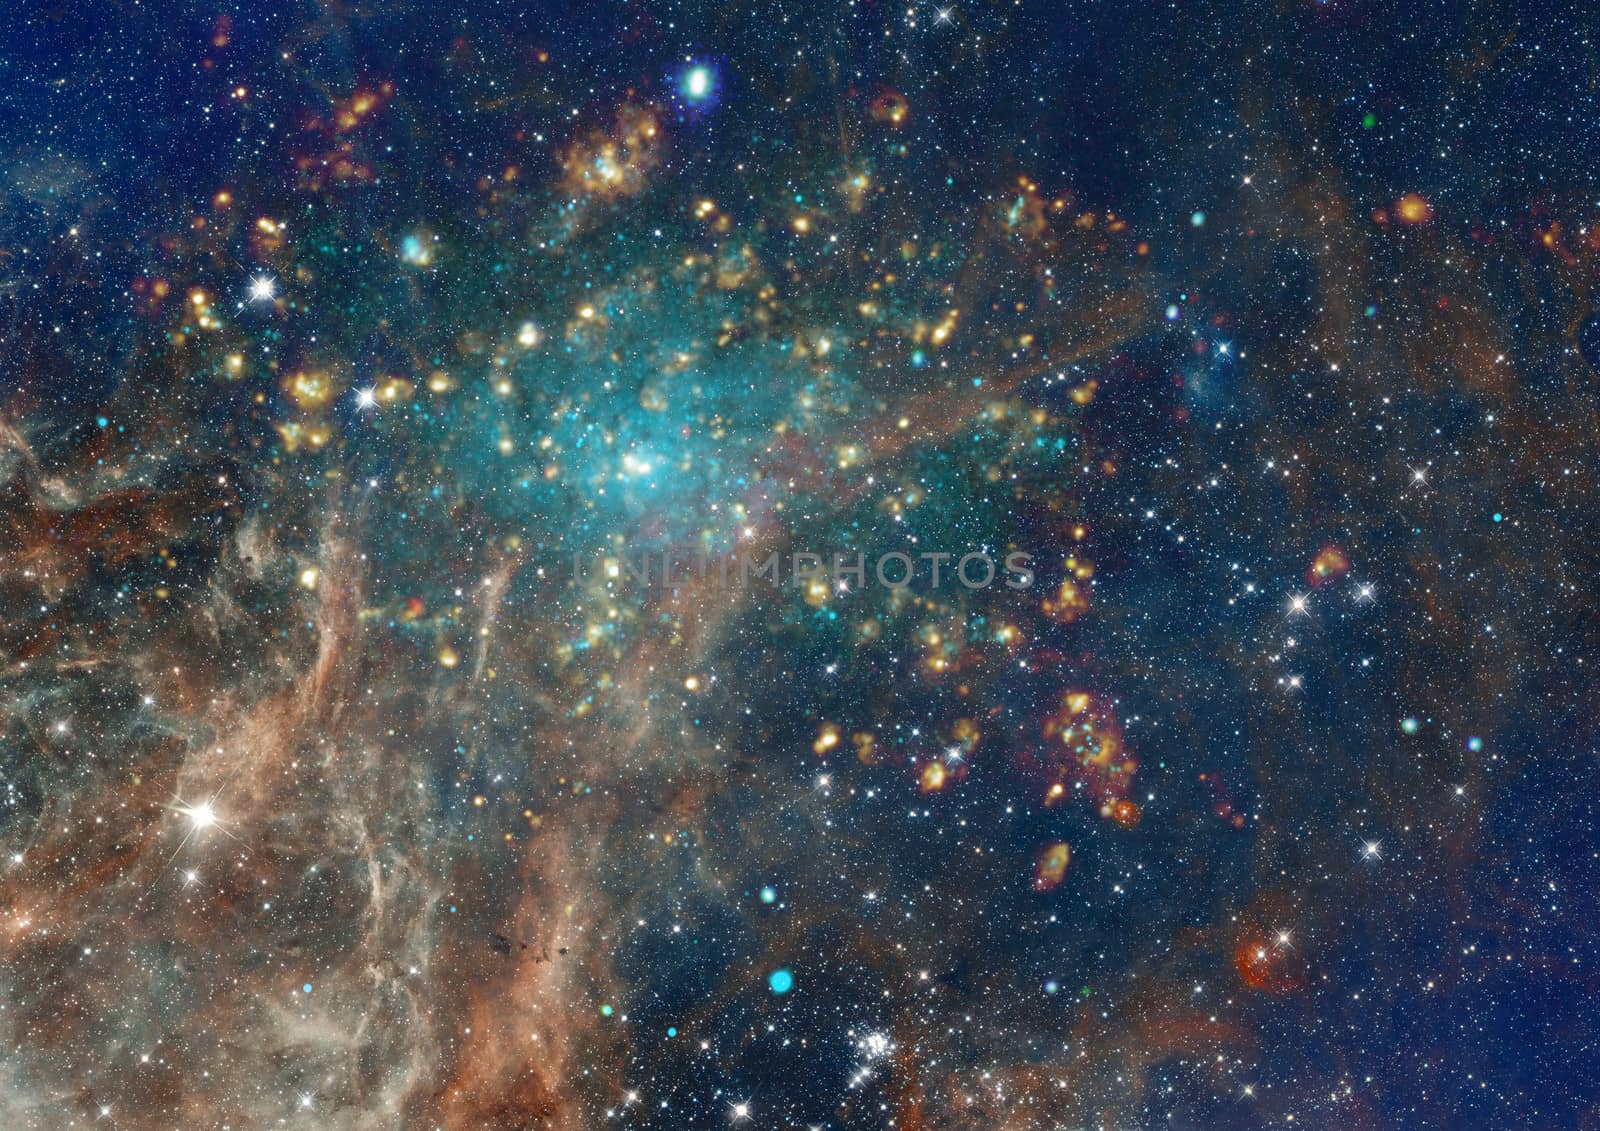 Star field in space, a nebulae and a gas congestion. "Elements of this image furnished by NASA".